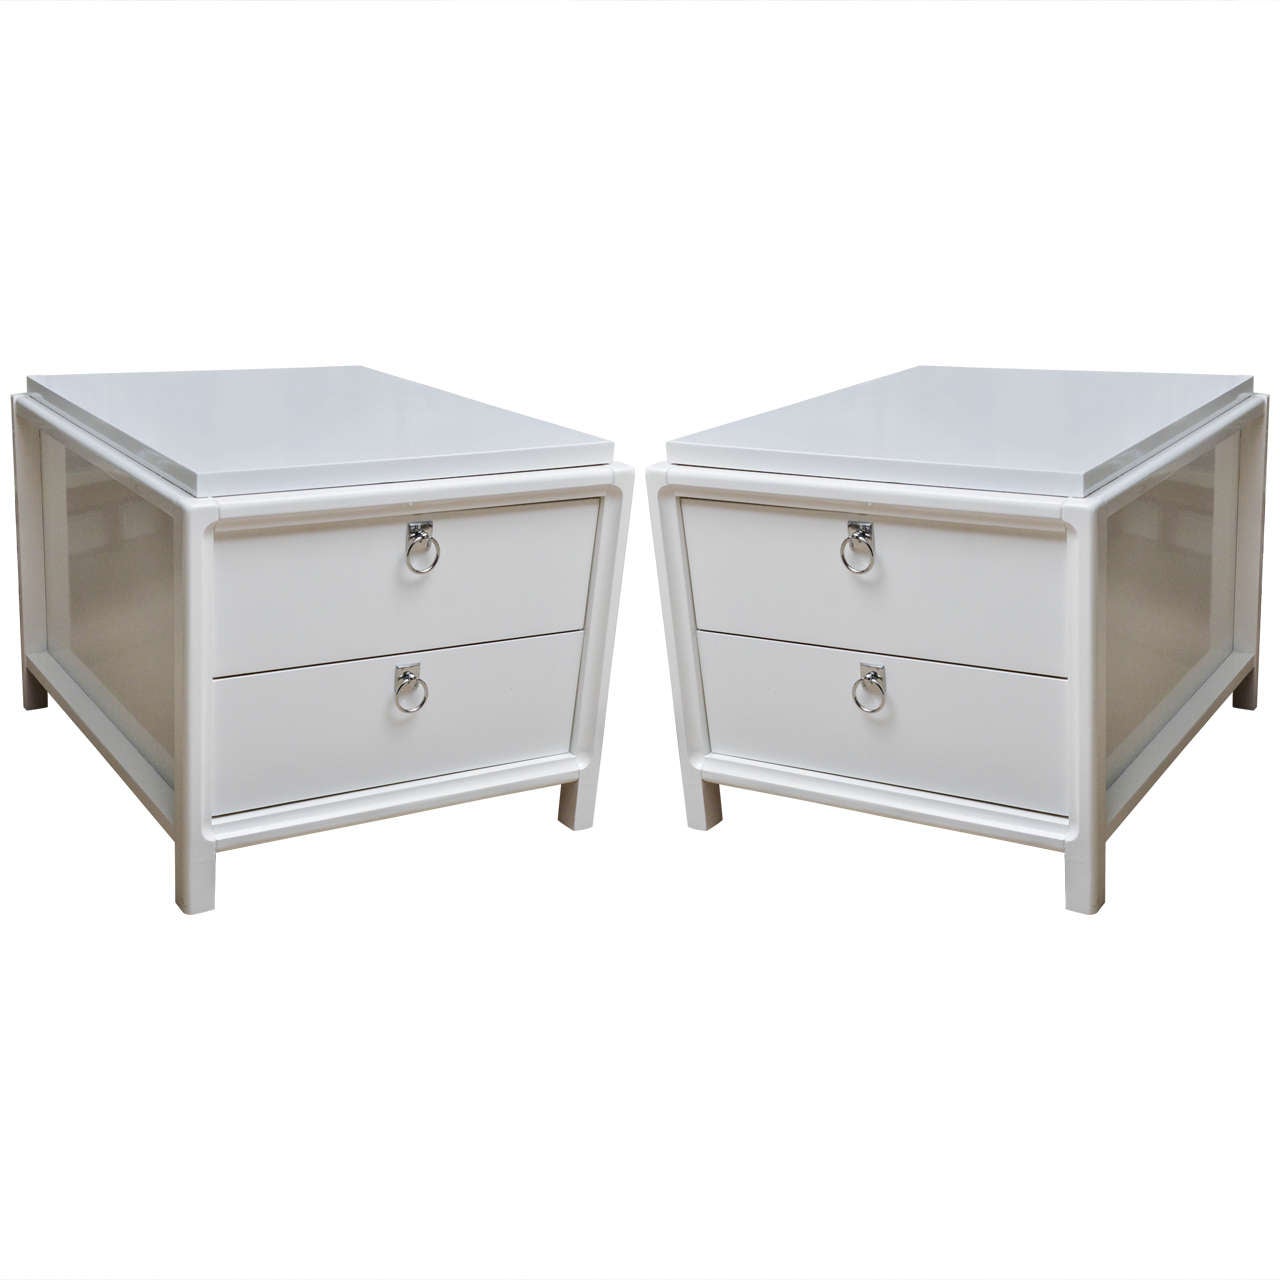 Pair of Vintage White Lacquer Two-Drawer Nightstands